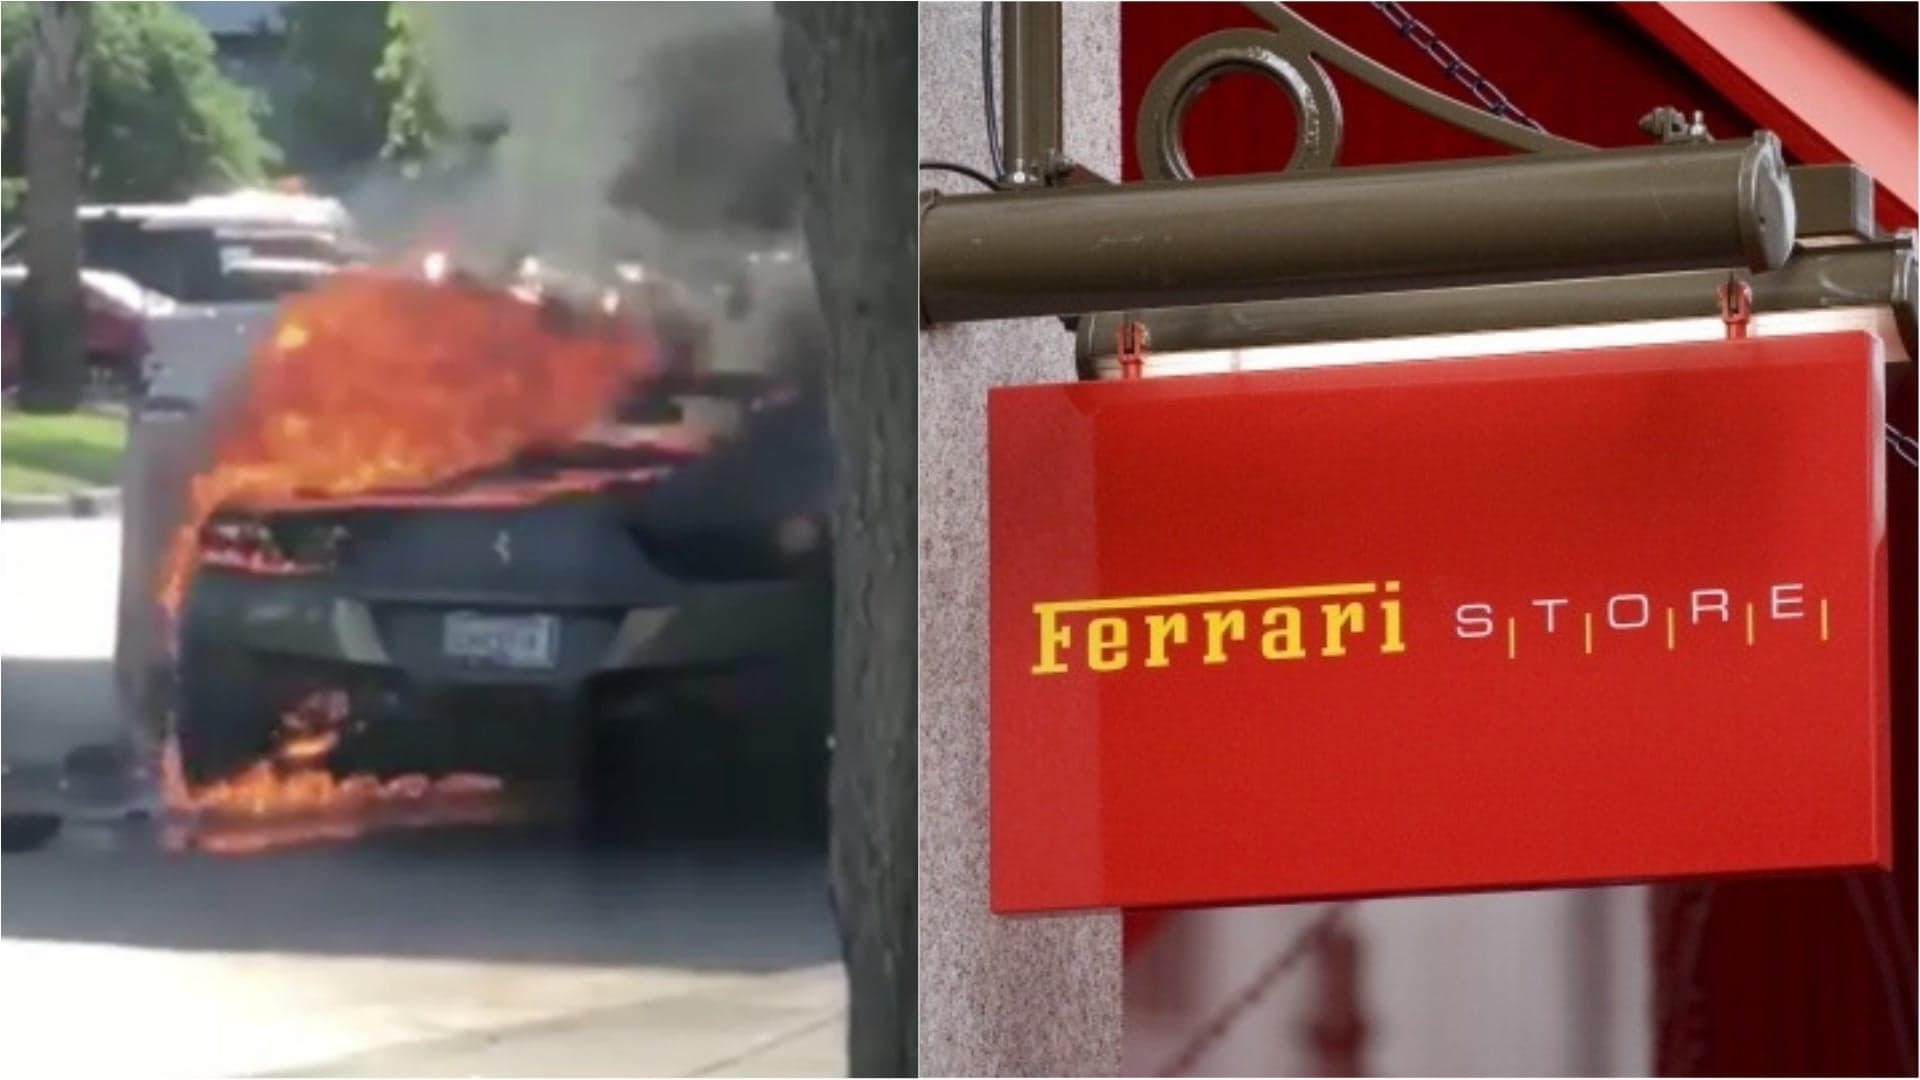 Ferrari 458 Randomly Catches Fire, Goes up in Smoke at Florida Mall